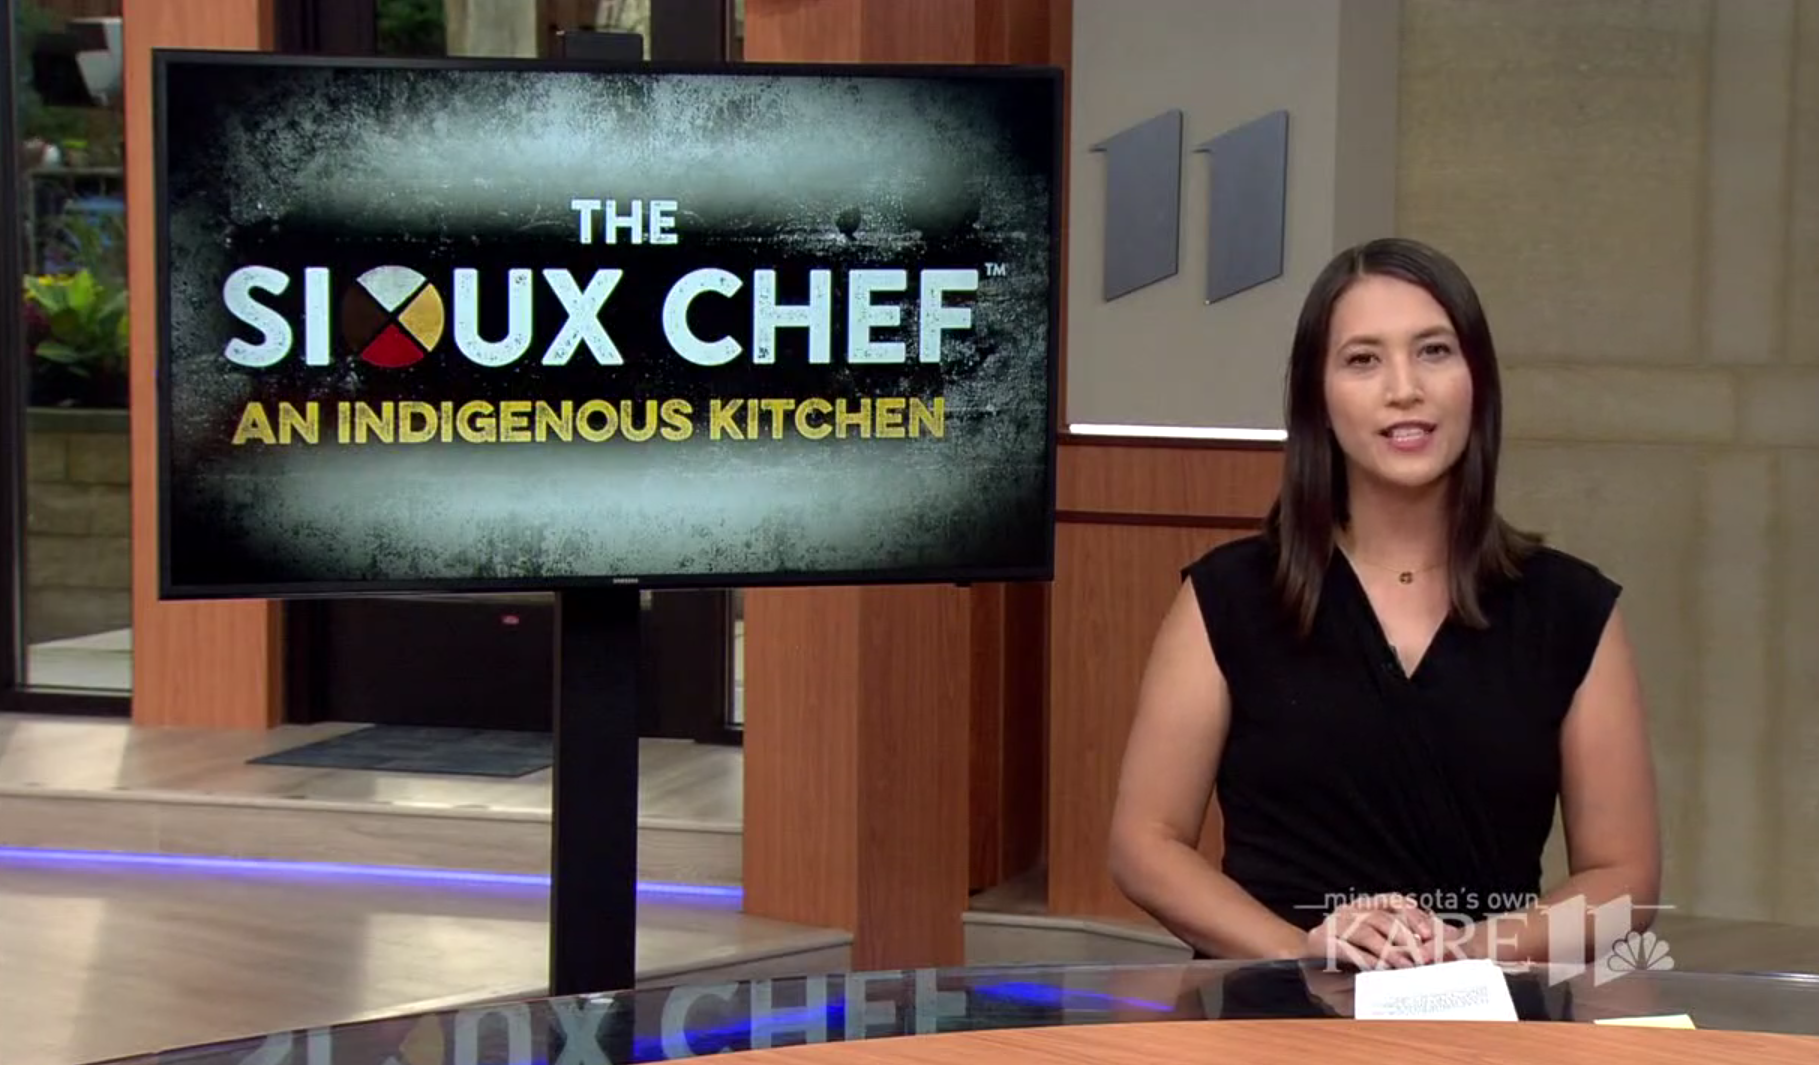 The Sioux Chef and Water Works in the news